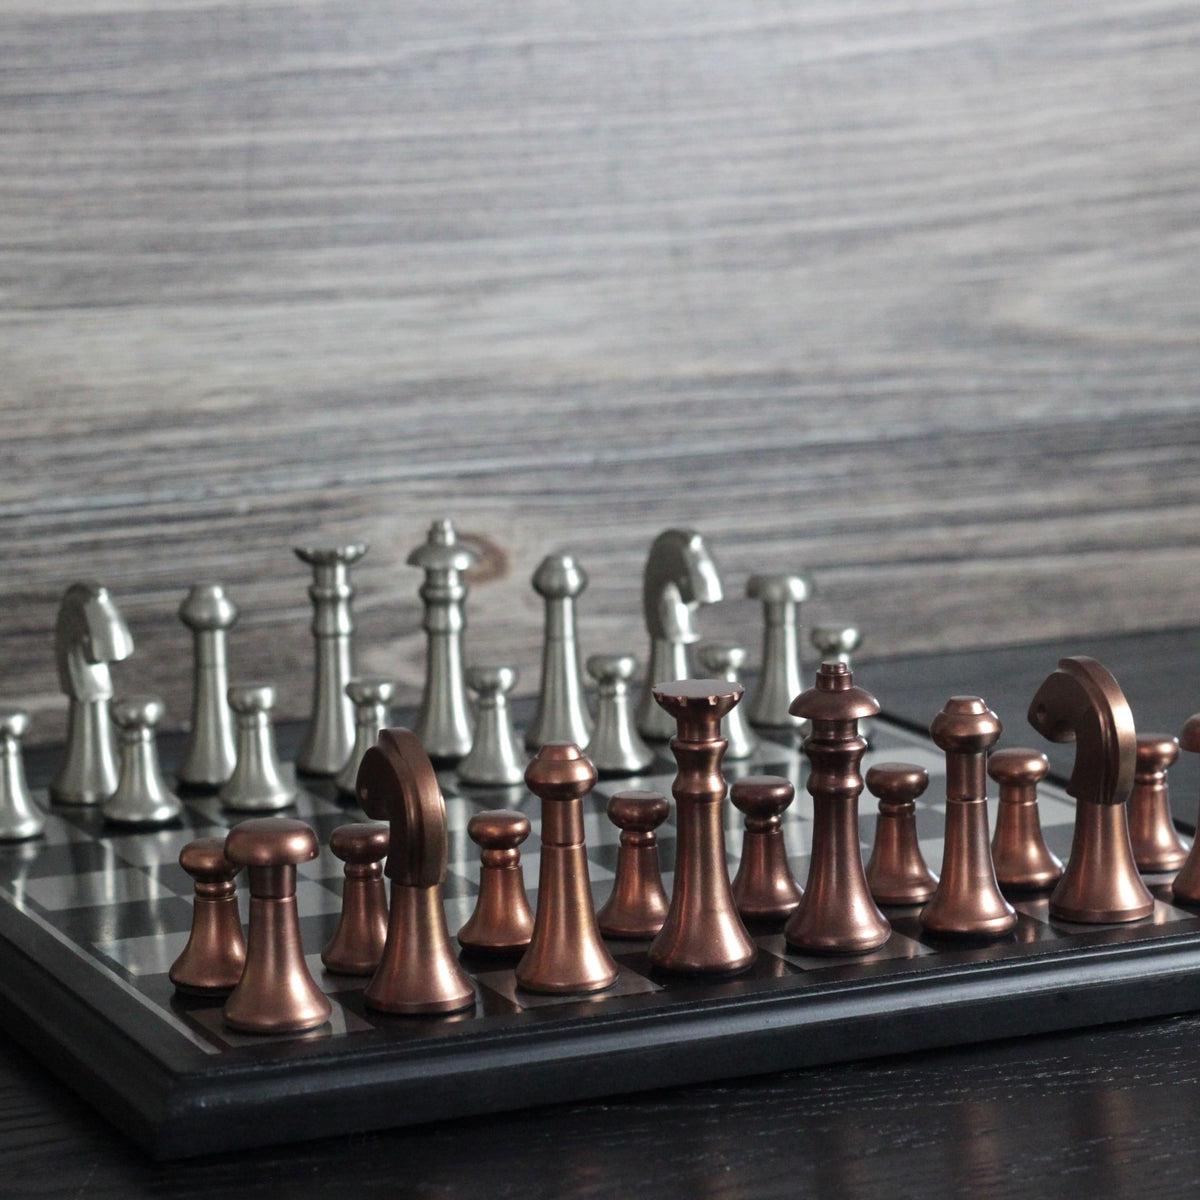 The Modern Defense - Silver and Copper Metallic Chess Set - Marble Cultures